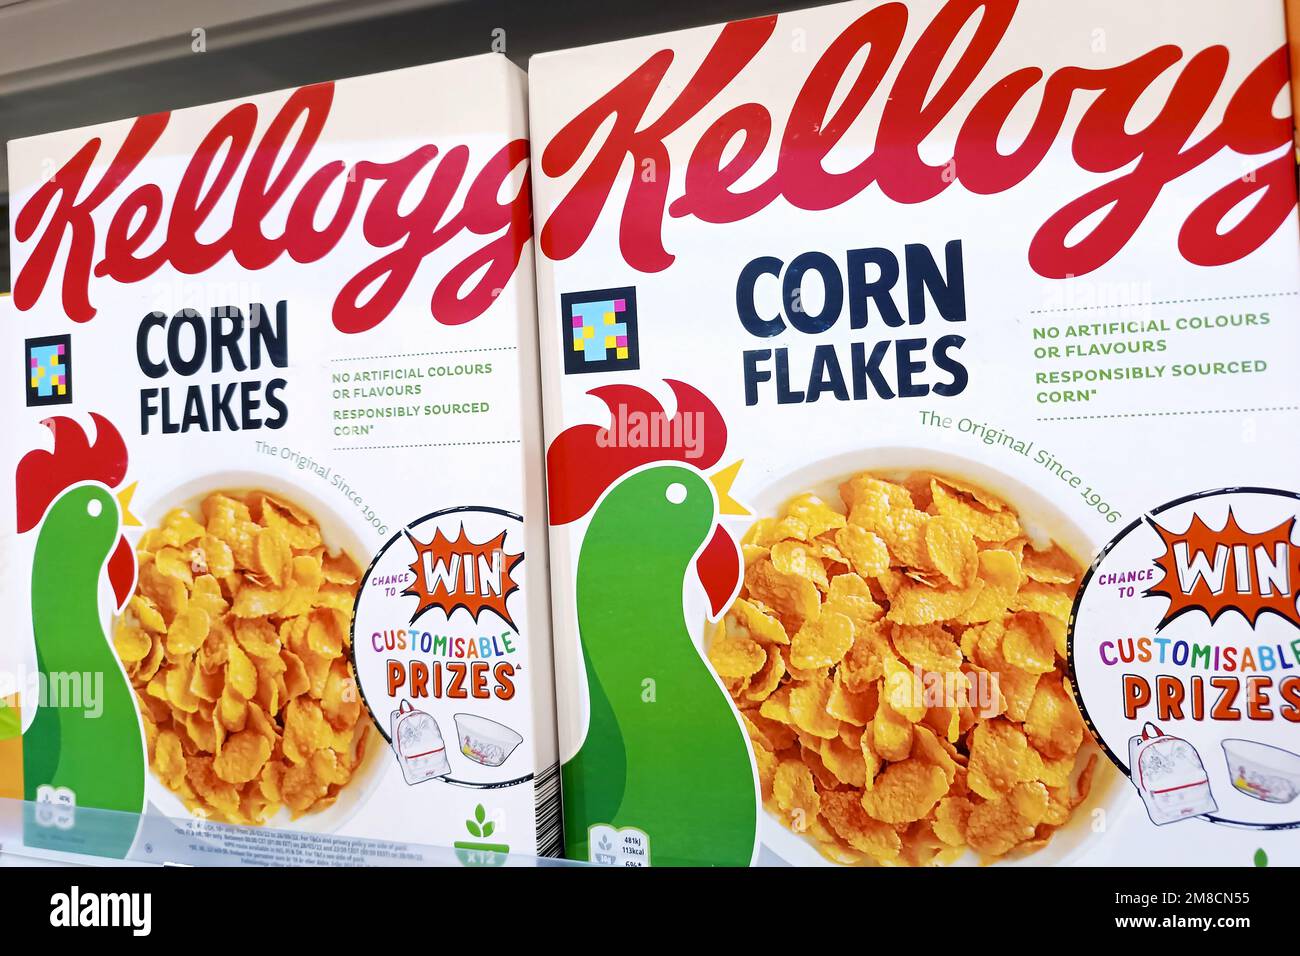 DUSHANBE, TAJIKISTAN - AUGUST 12, 2022: American Kellogg's corn flakes package boxes on the display shelf in the supermarket. Stock Photo